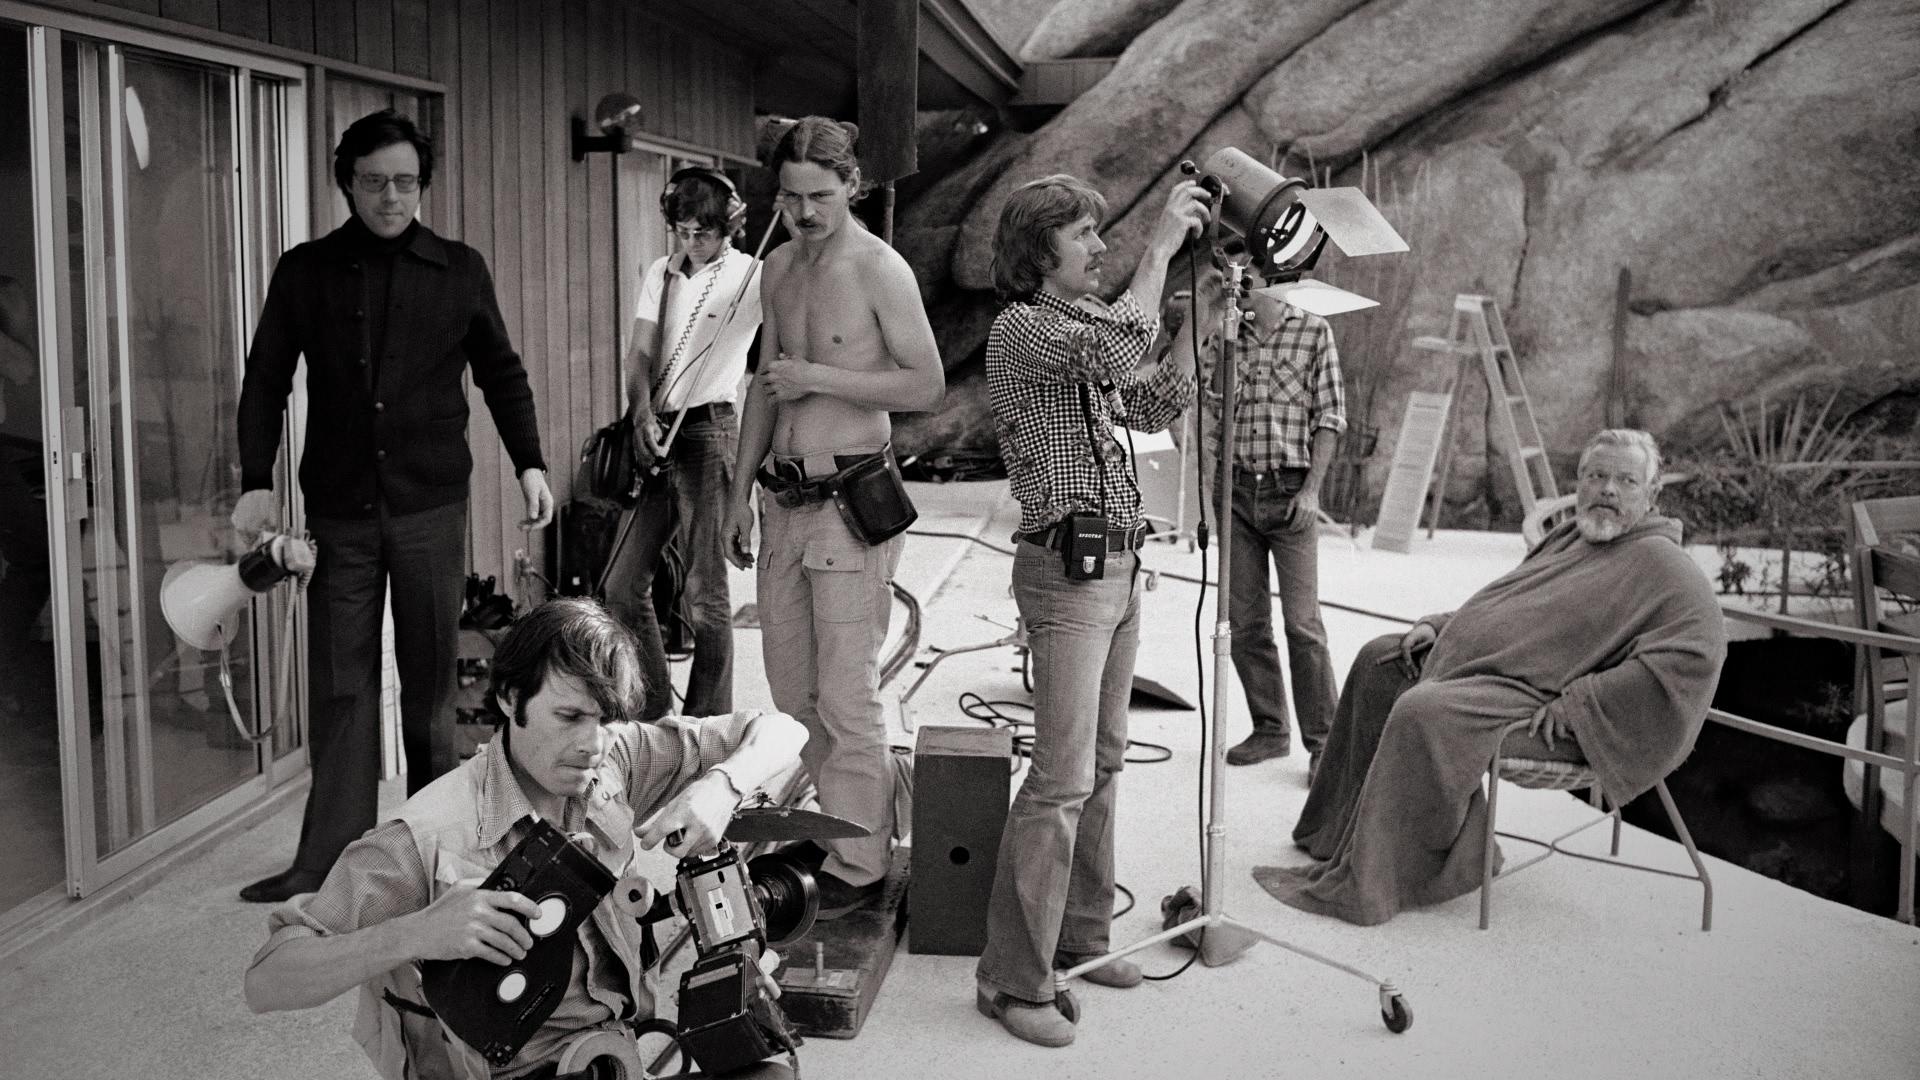 Orson Welles, Peter Bogdanovich and the crew on the set of “The Other Side of the Wind.”